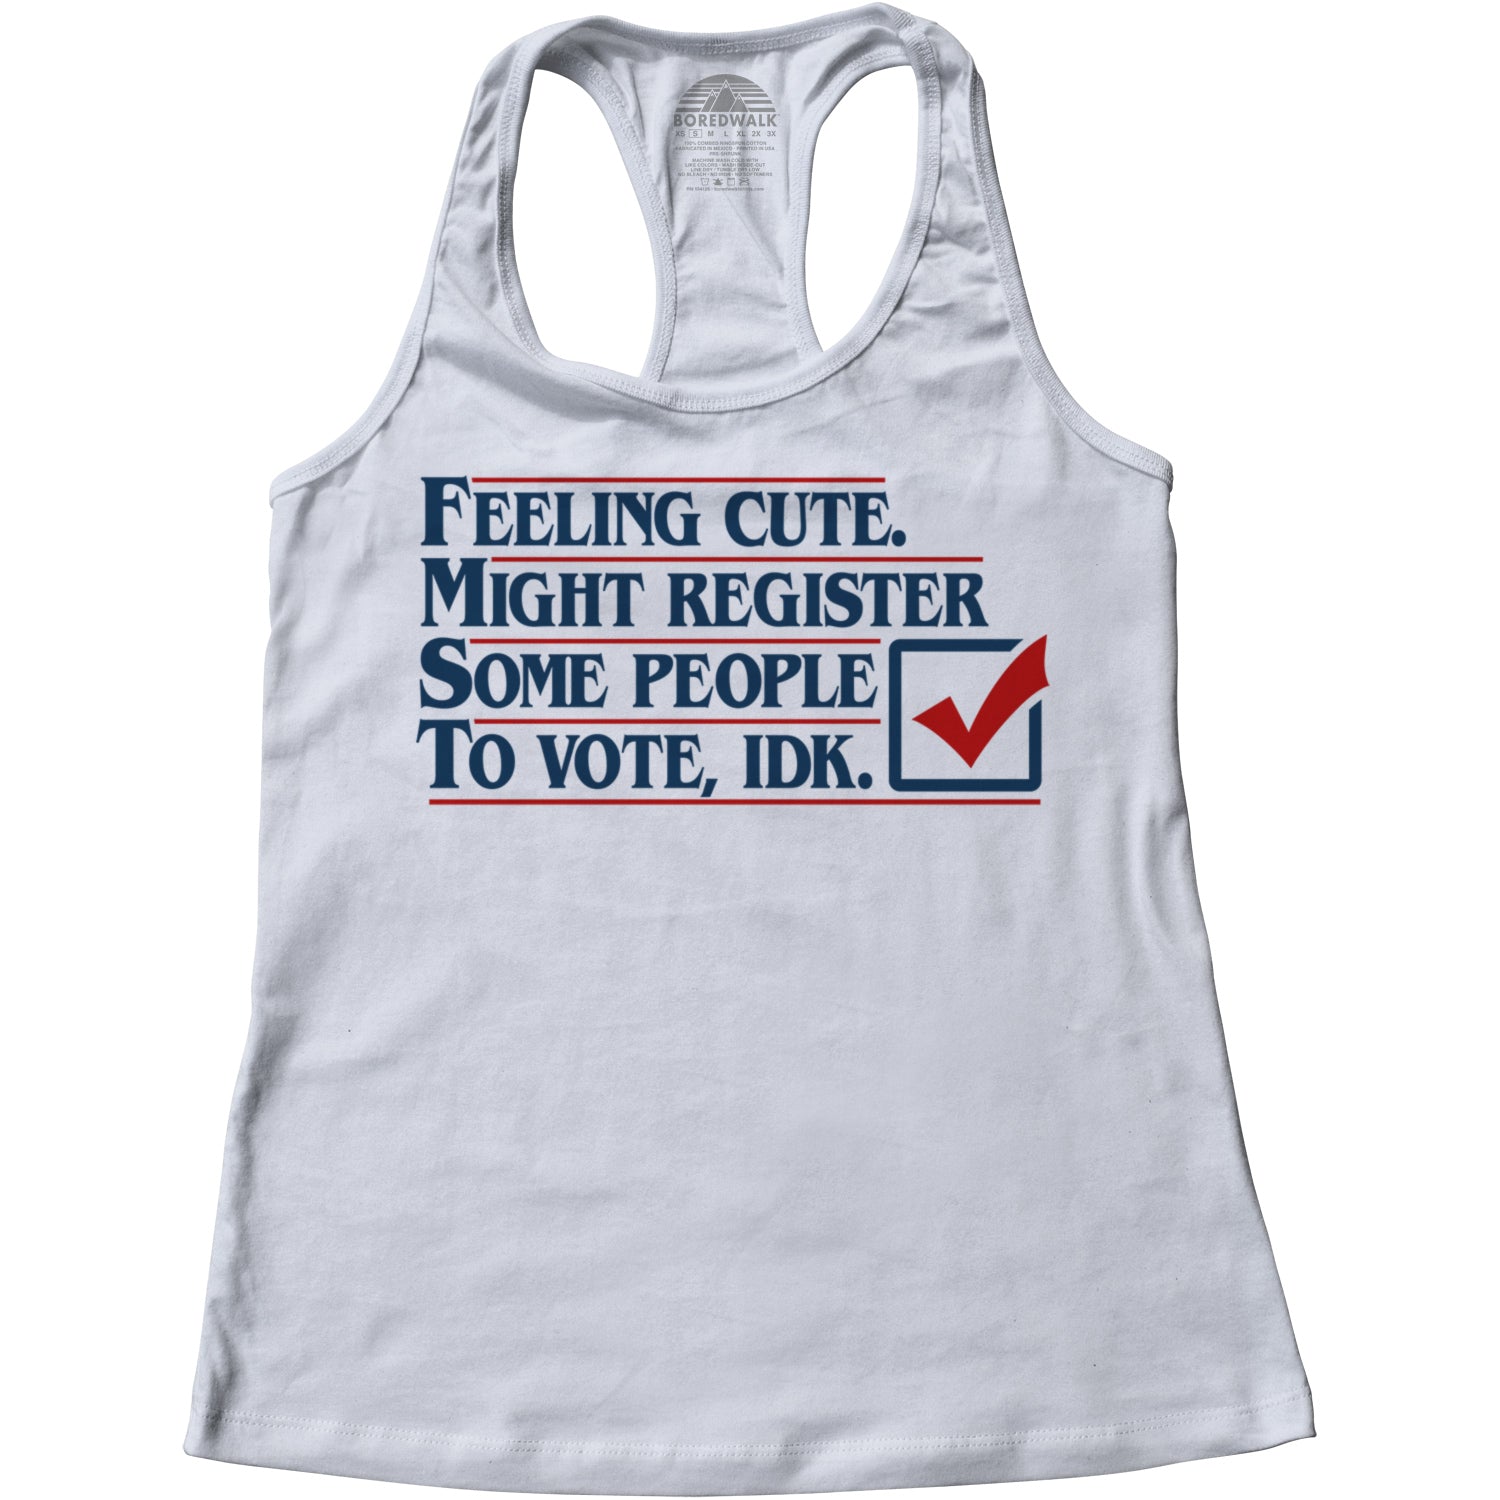 Women's Feeling Cute Might Register Some People to Vote Racerback Tank Top